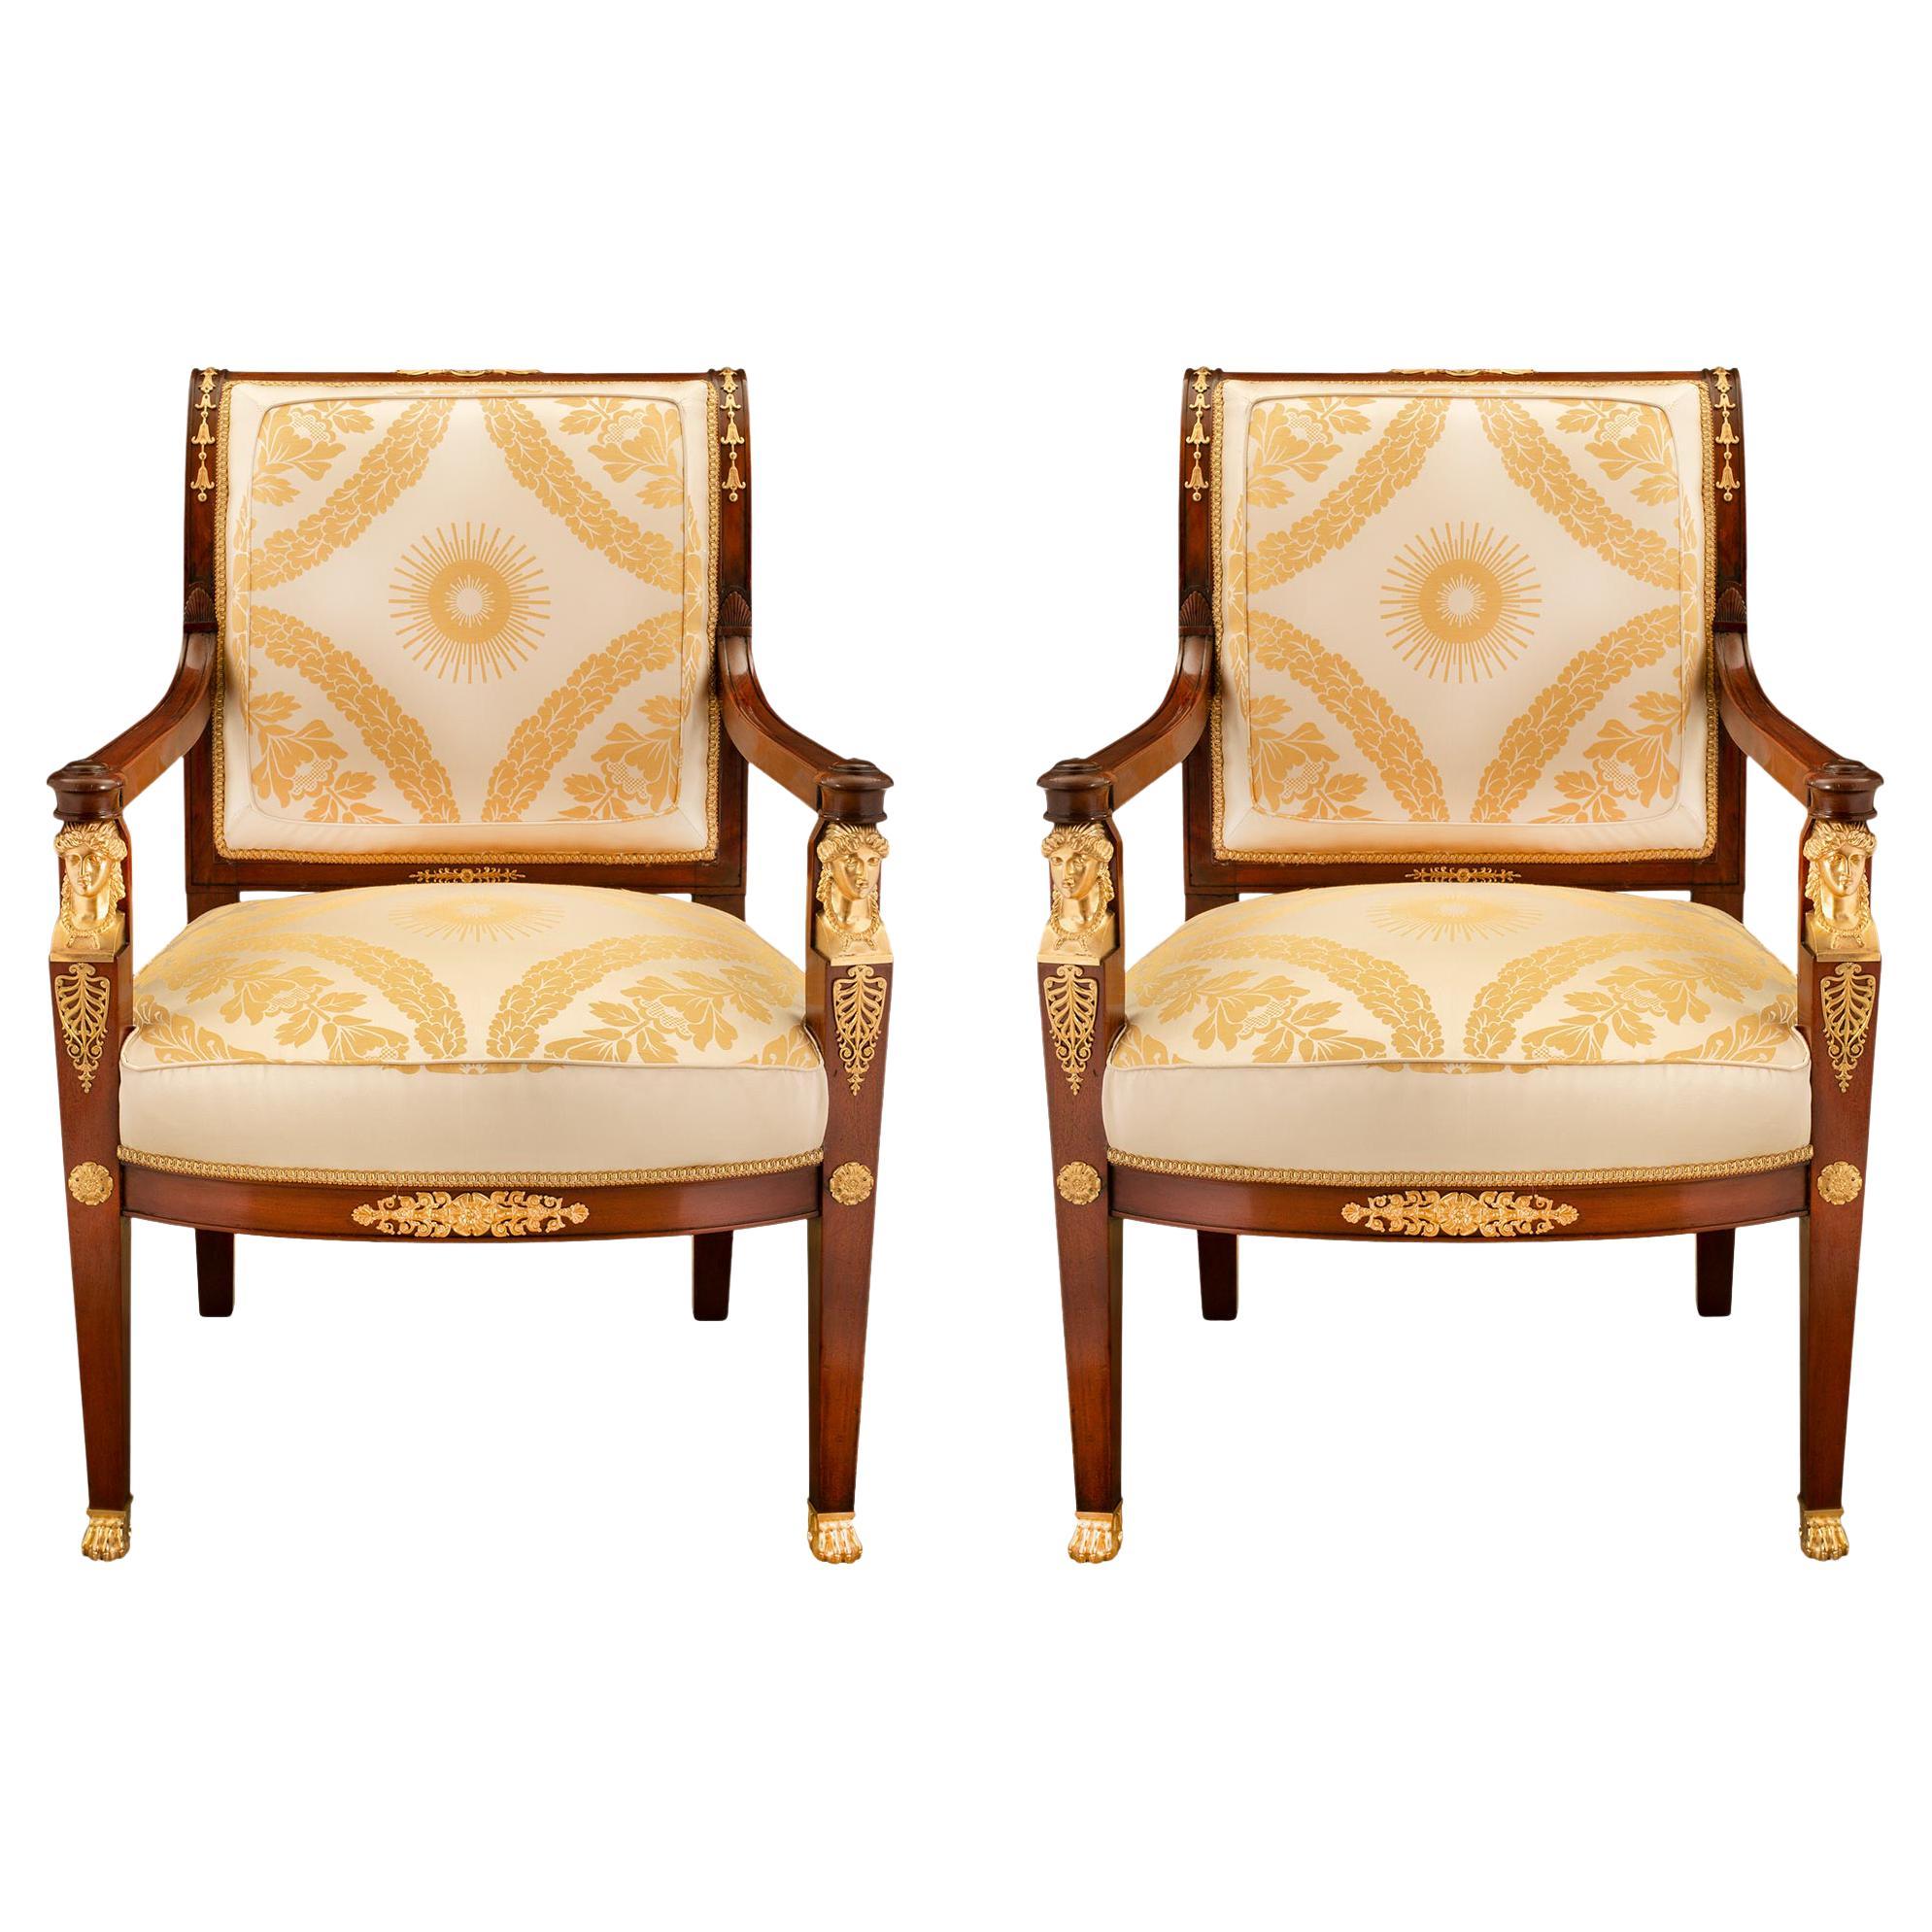 Pair of French Mid 19th Century Empire St. Mahogany and Ormolu Mounted Armchair